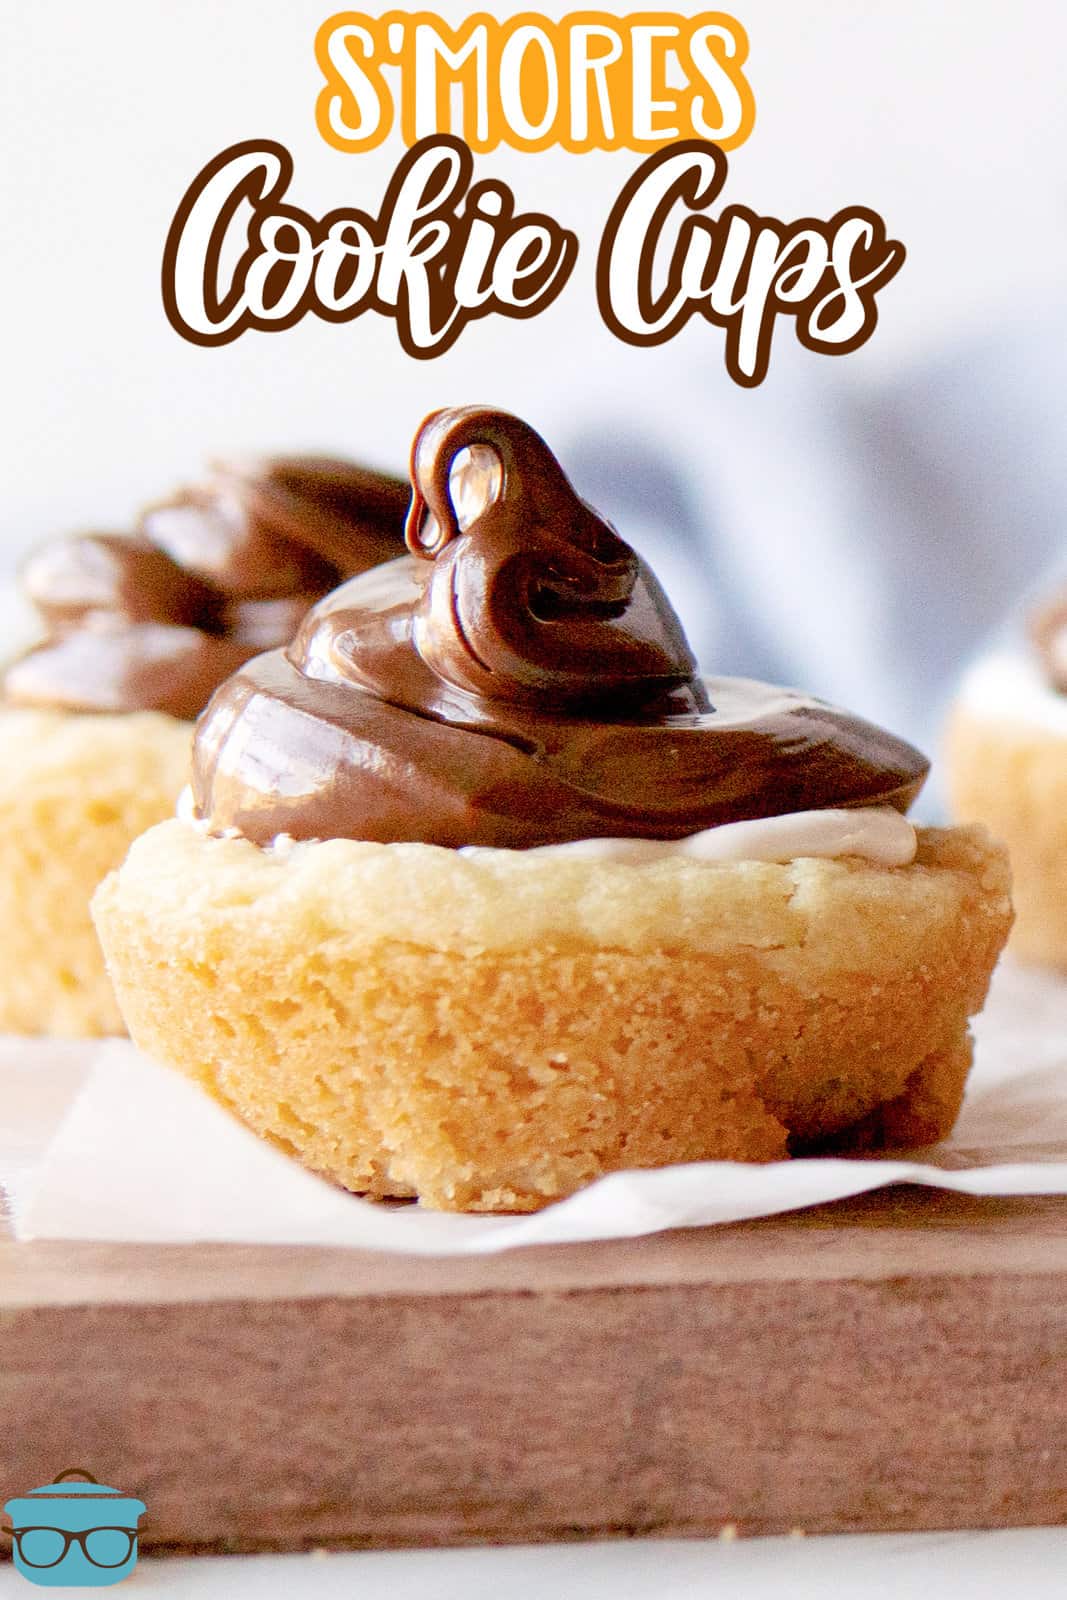 Pinterest image close up of S'mores Cookie Cups showing the nutella on top.